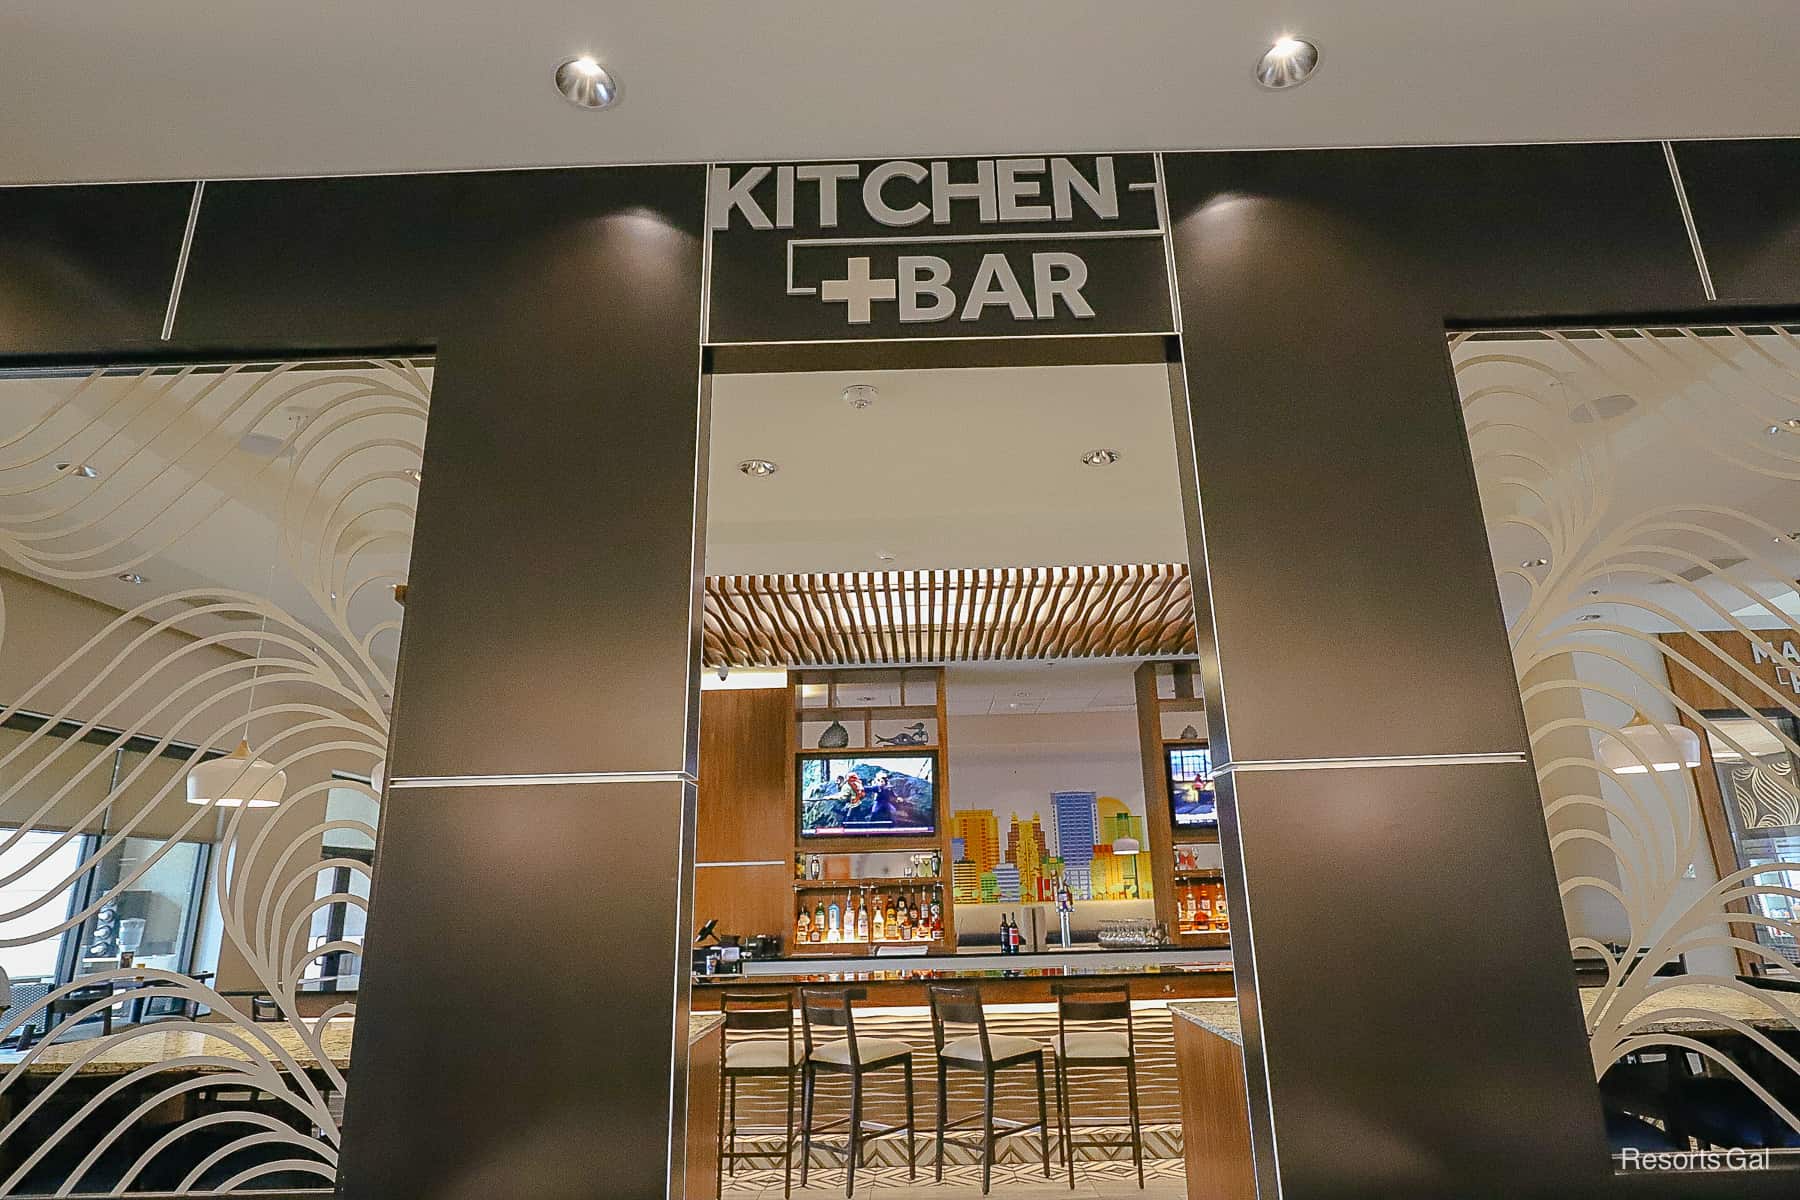 The entrance to the Kitchen Bar at the Disney Springs Drury Plaza